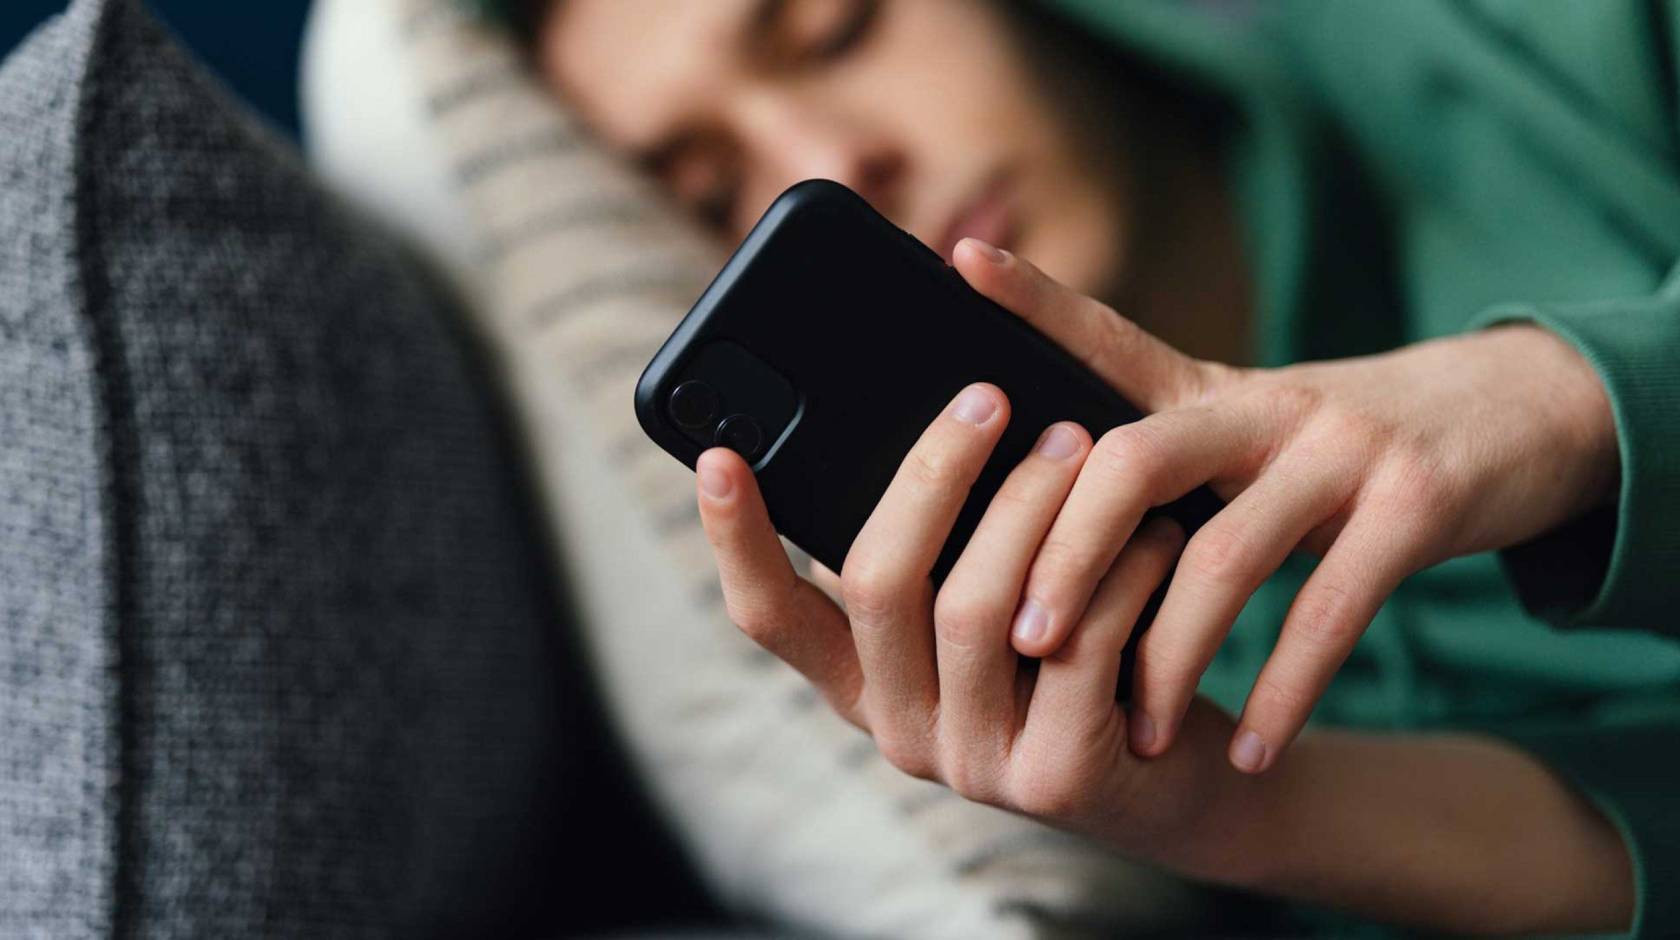 A teen, slightly out of focus, lying on the couch, looking at phone